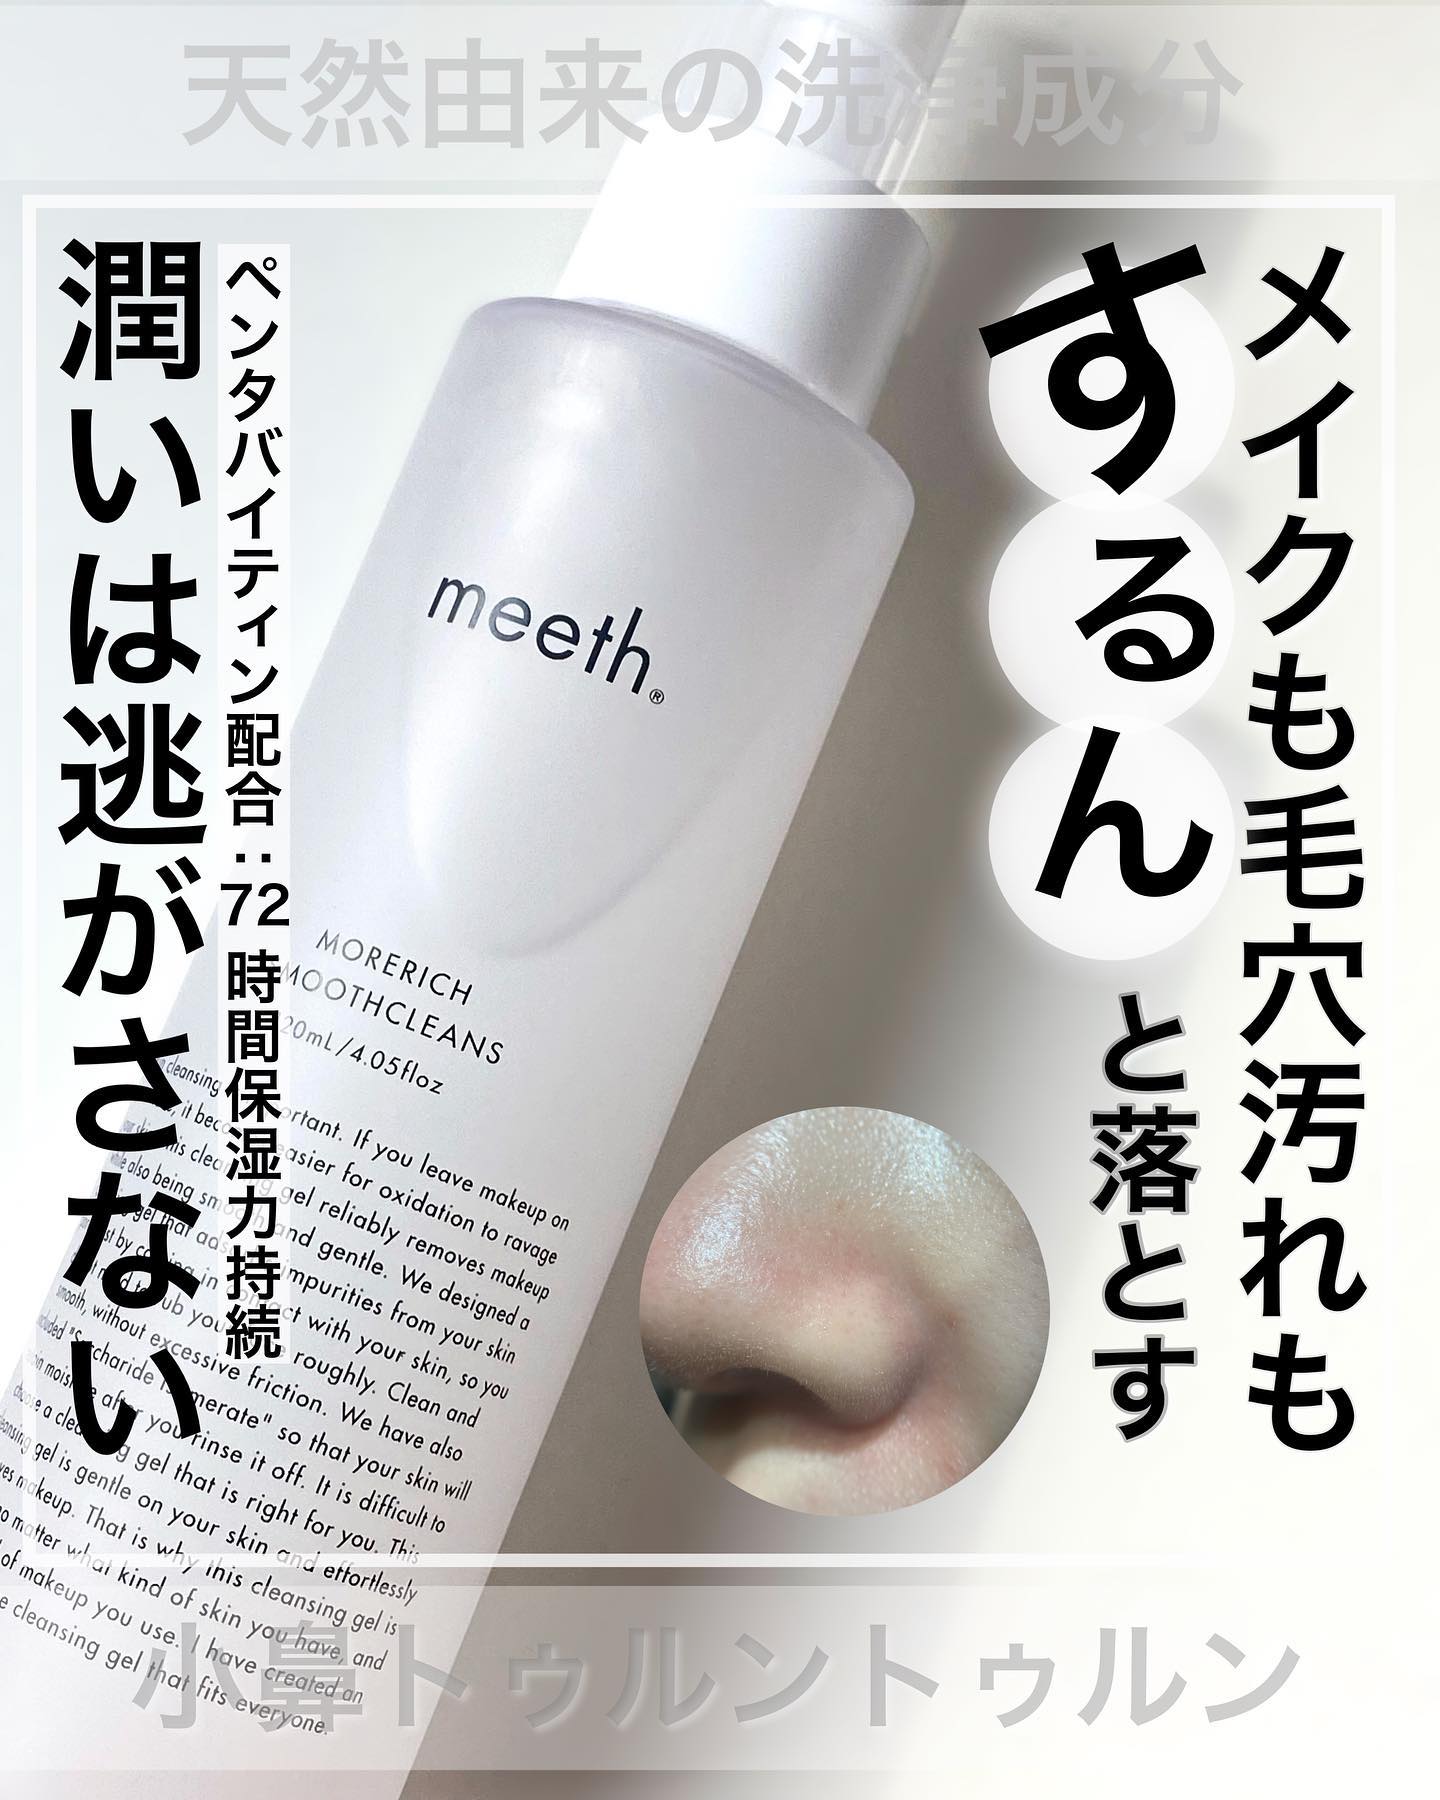 MORERICH SMOOTHCLEANS｜meeth｜meeth